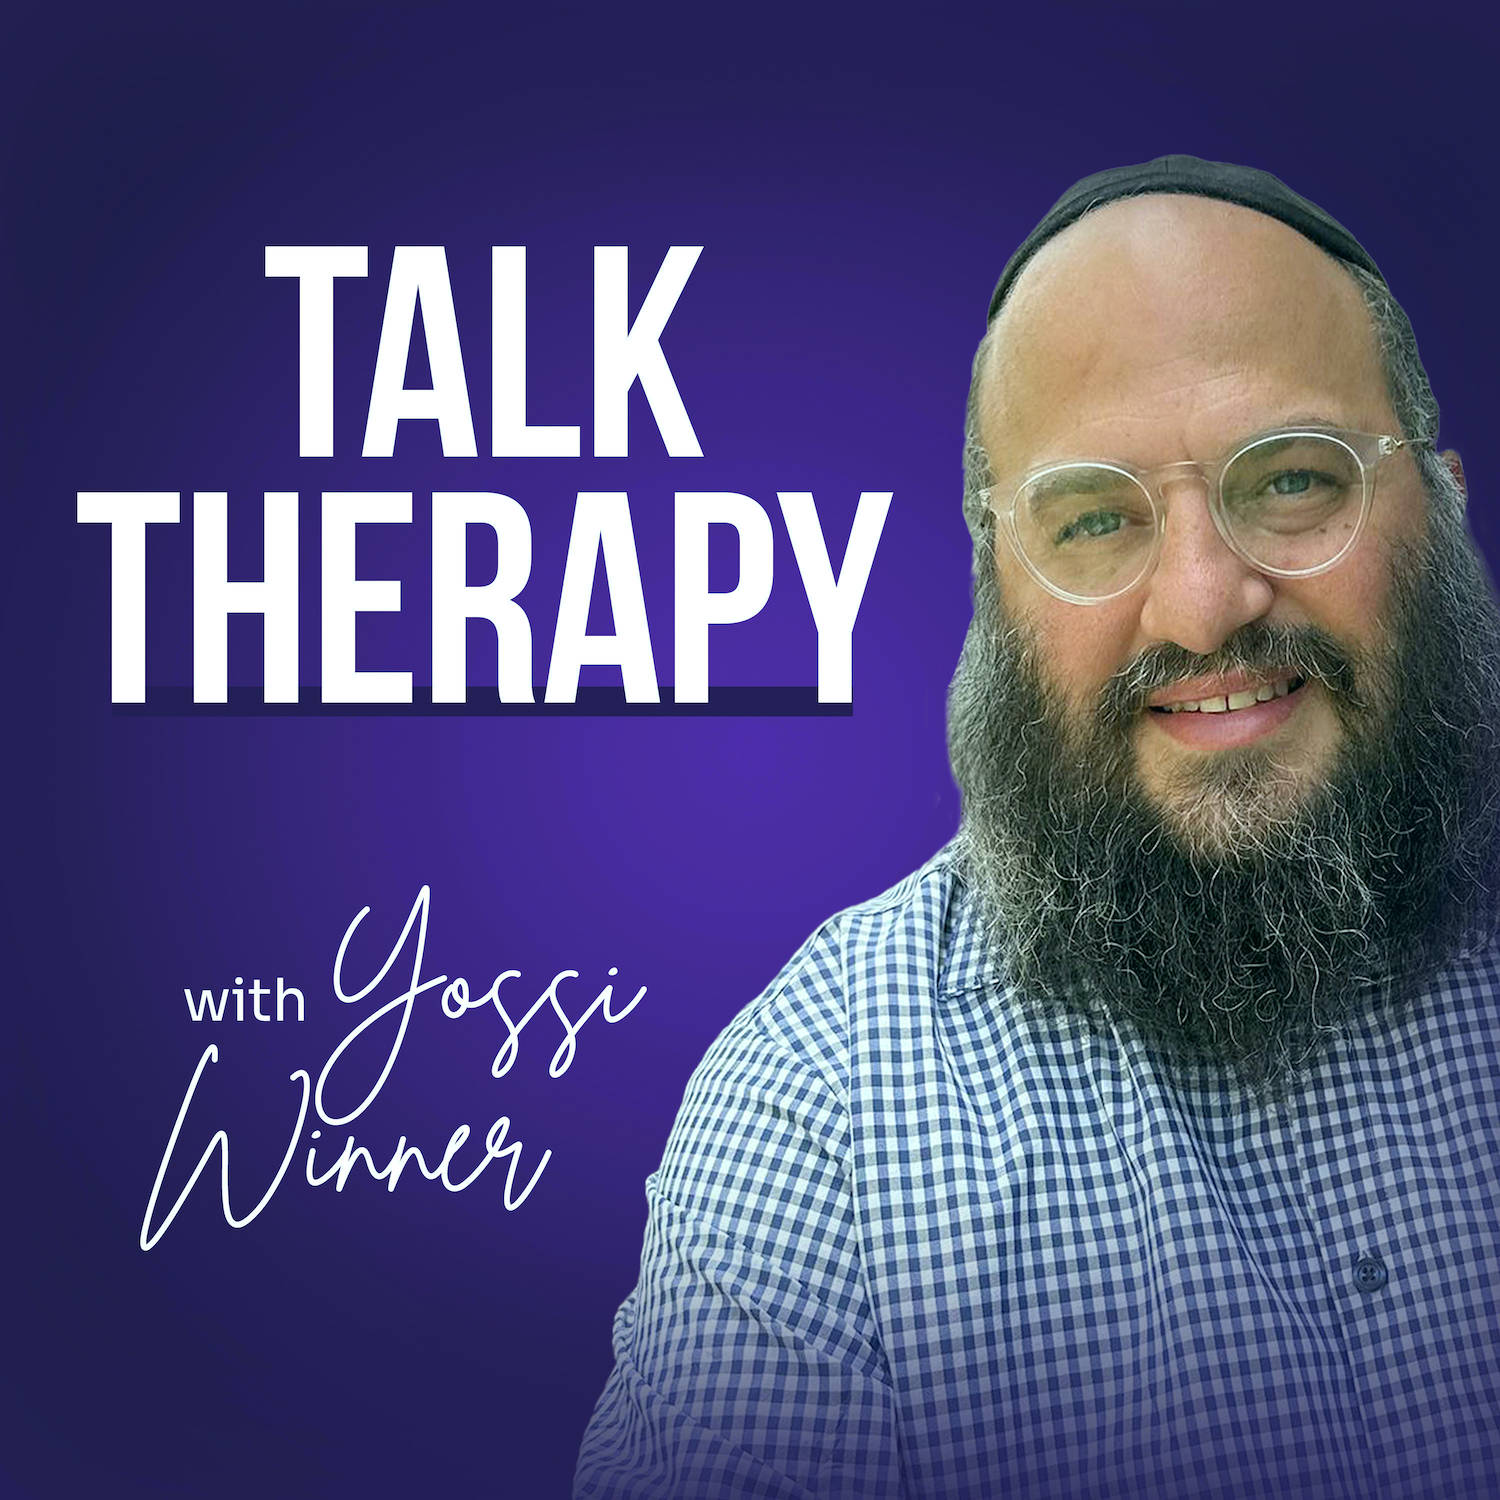 Artwork for Talk Therapy with Yossi Winner